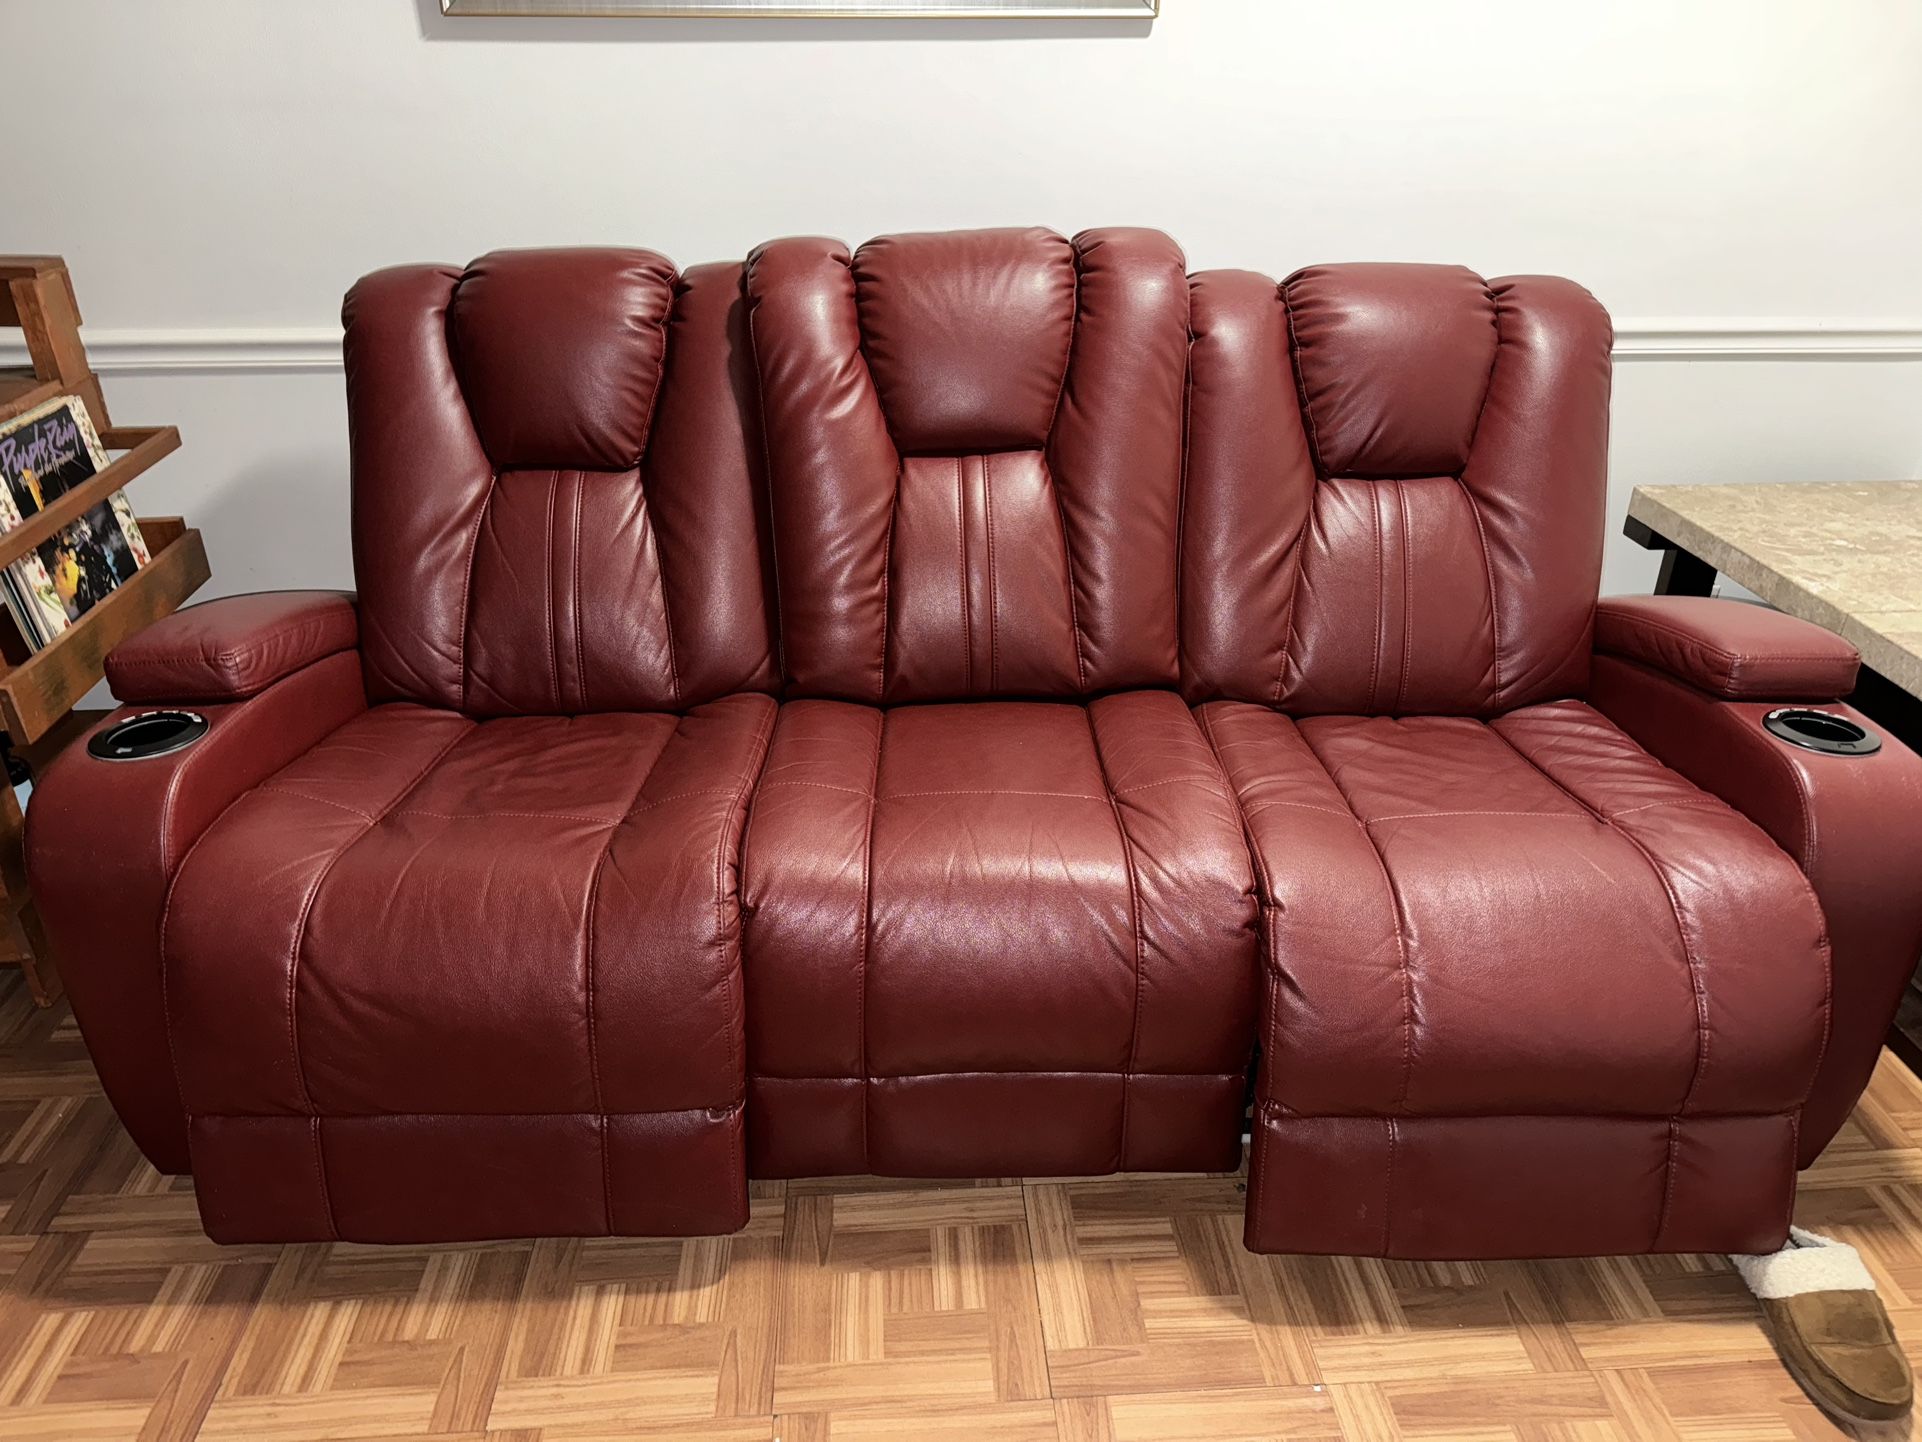 Rooms to Go Red Leather Couch